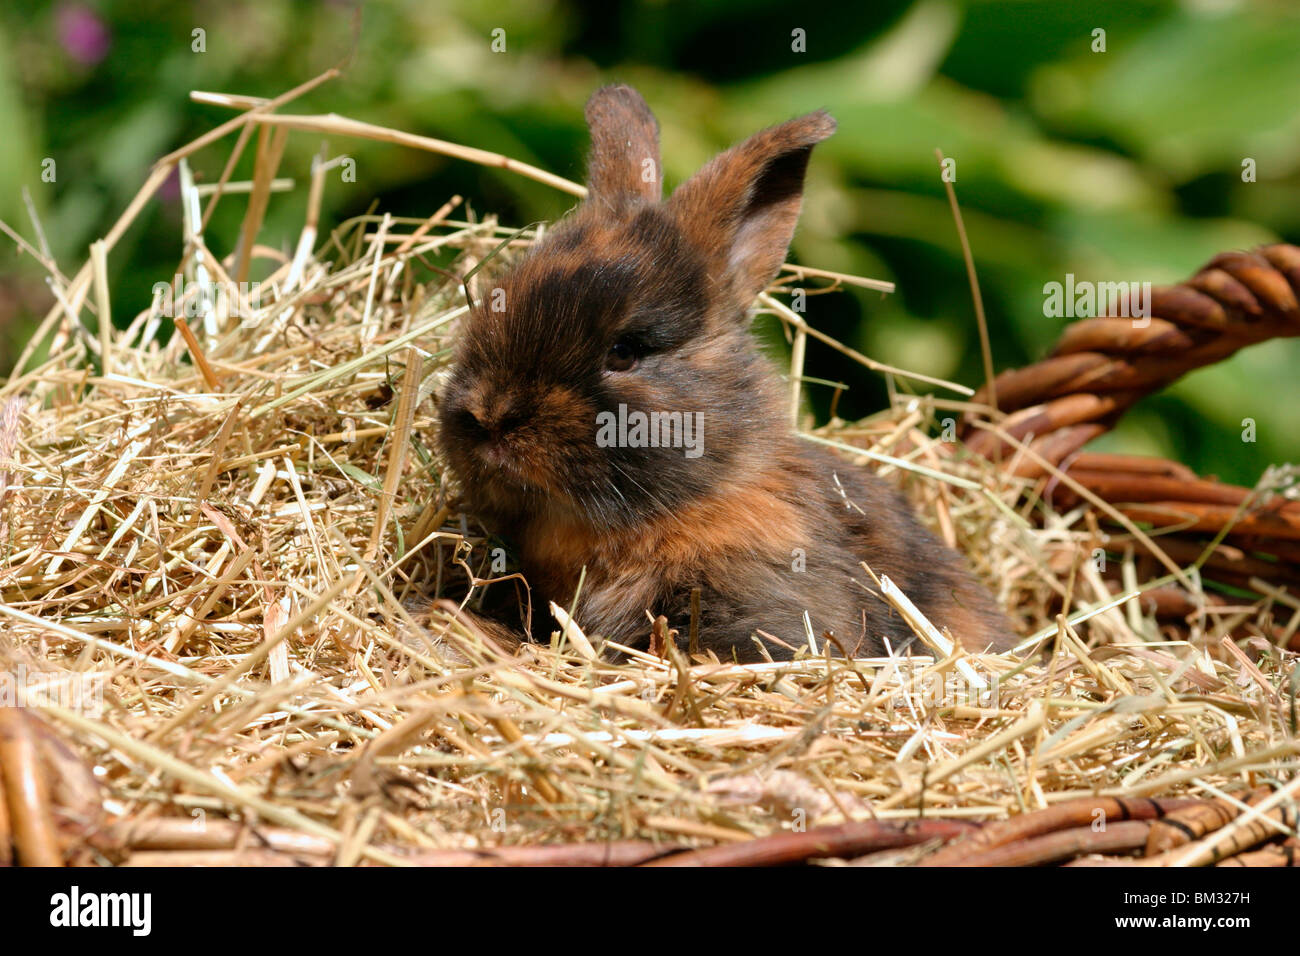 Kaninchen Junges / young rabbit Stock Photo